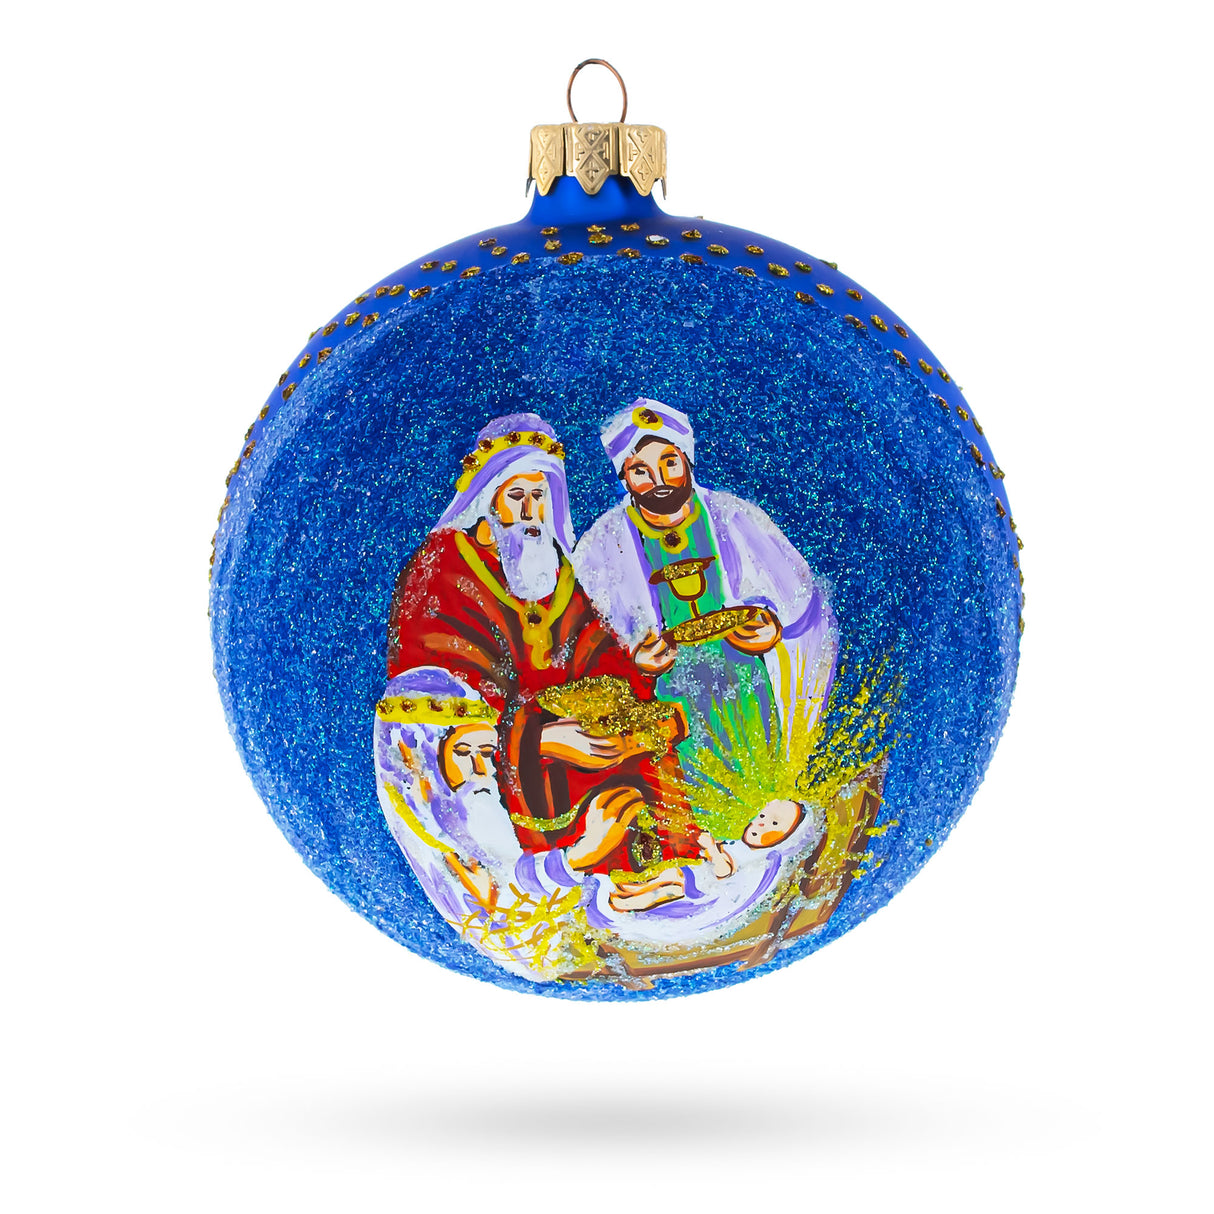 The Wise Men's' Gifts Glass Ball Nativity Christmas Ornament 4 Inches in Blue color, Round shape